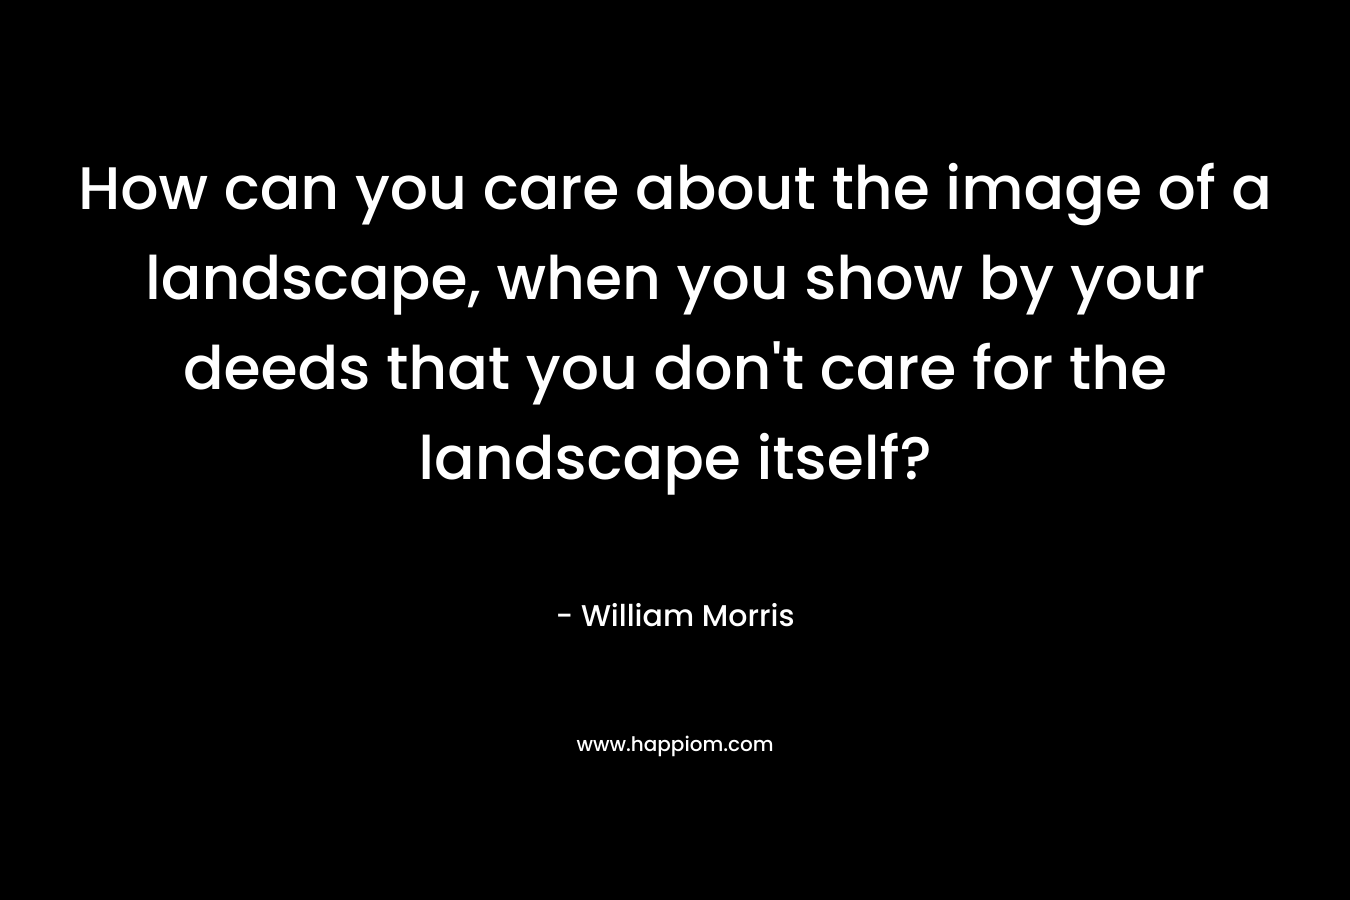 How can you care about the image of a landscape, when you show by your deeds that you don’t care for the landscape itself? – William Morris